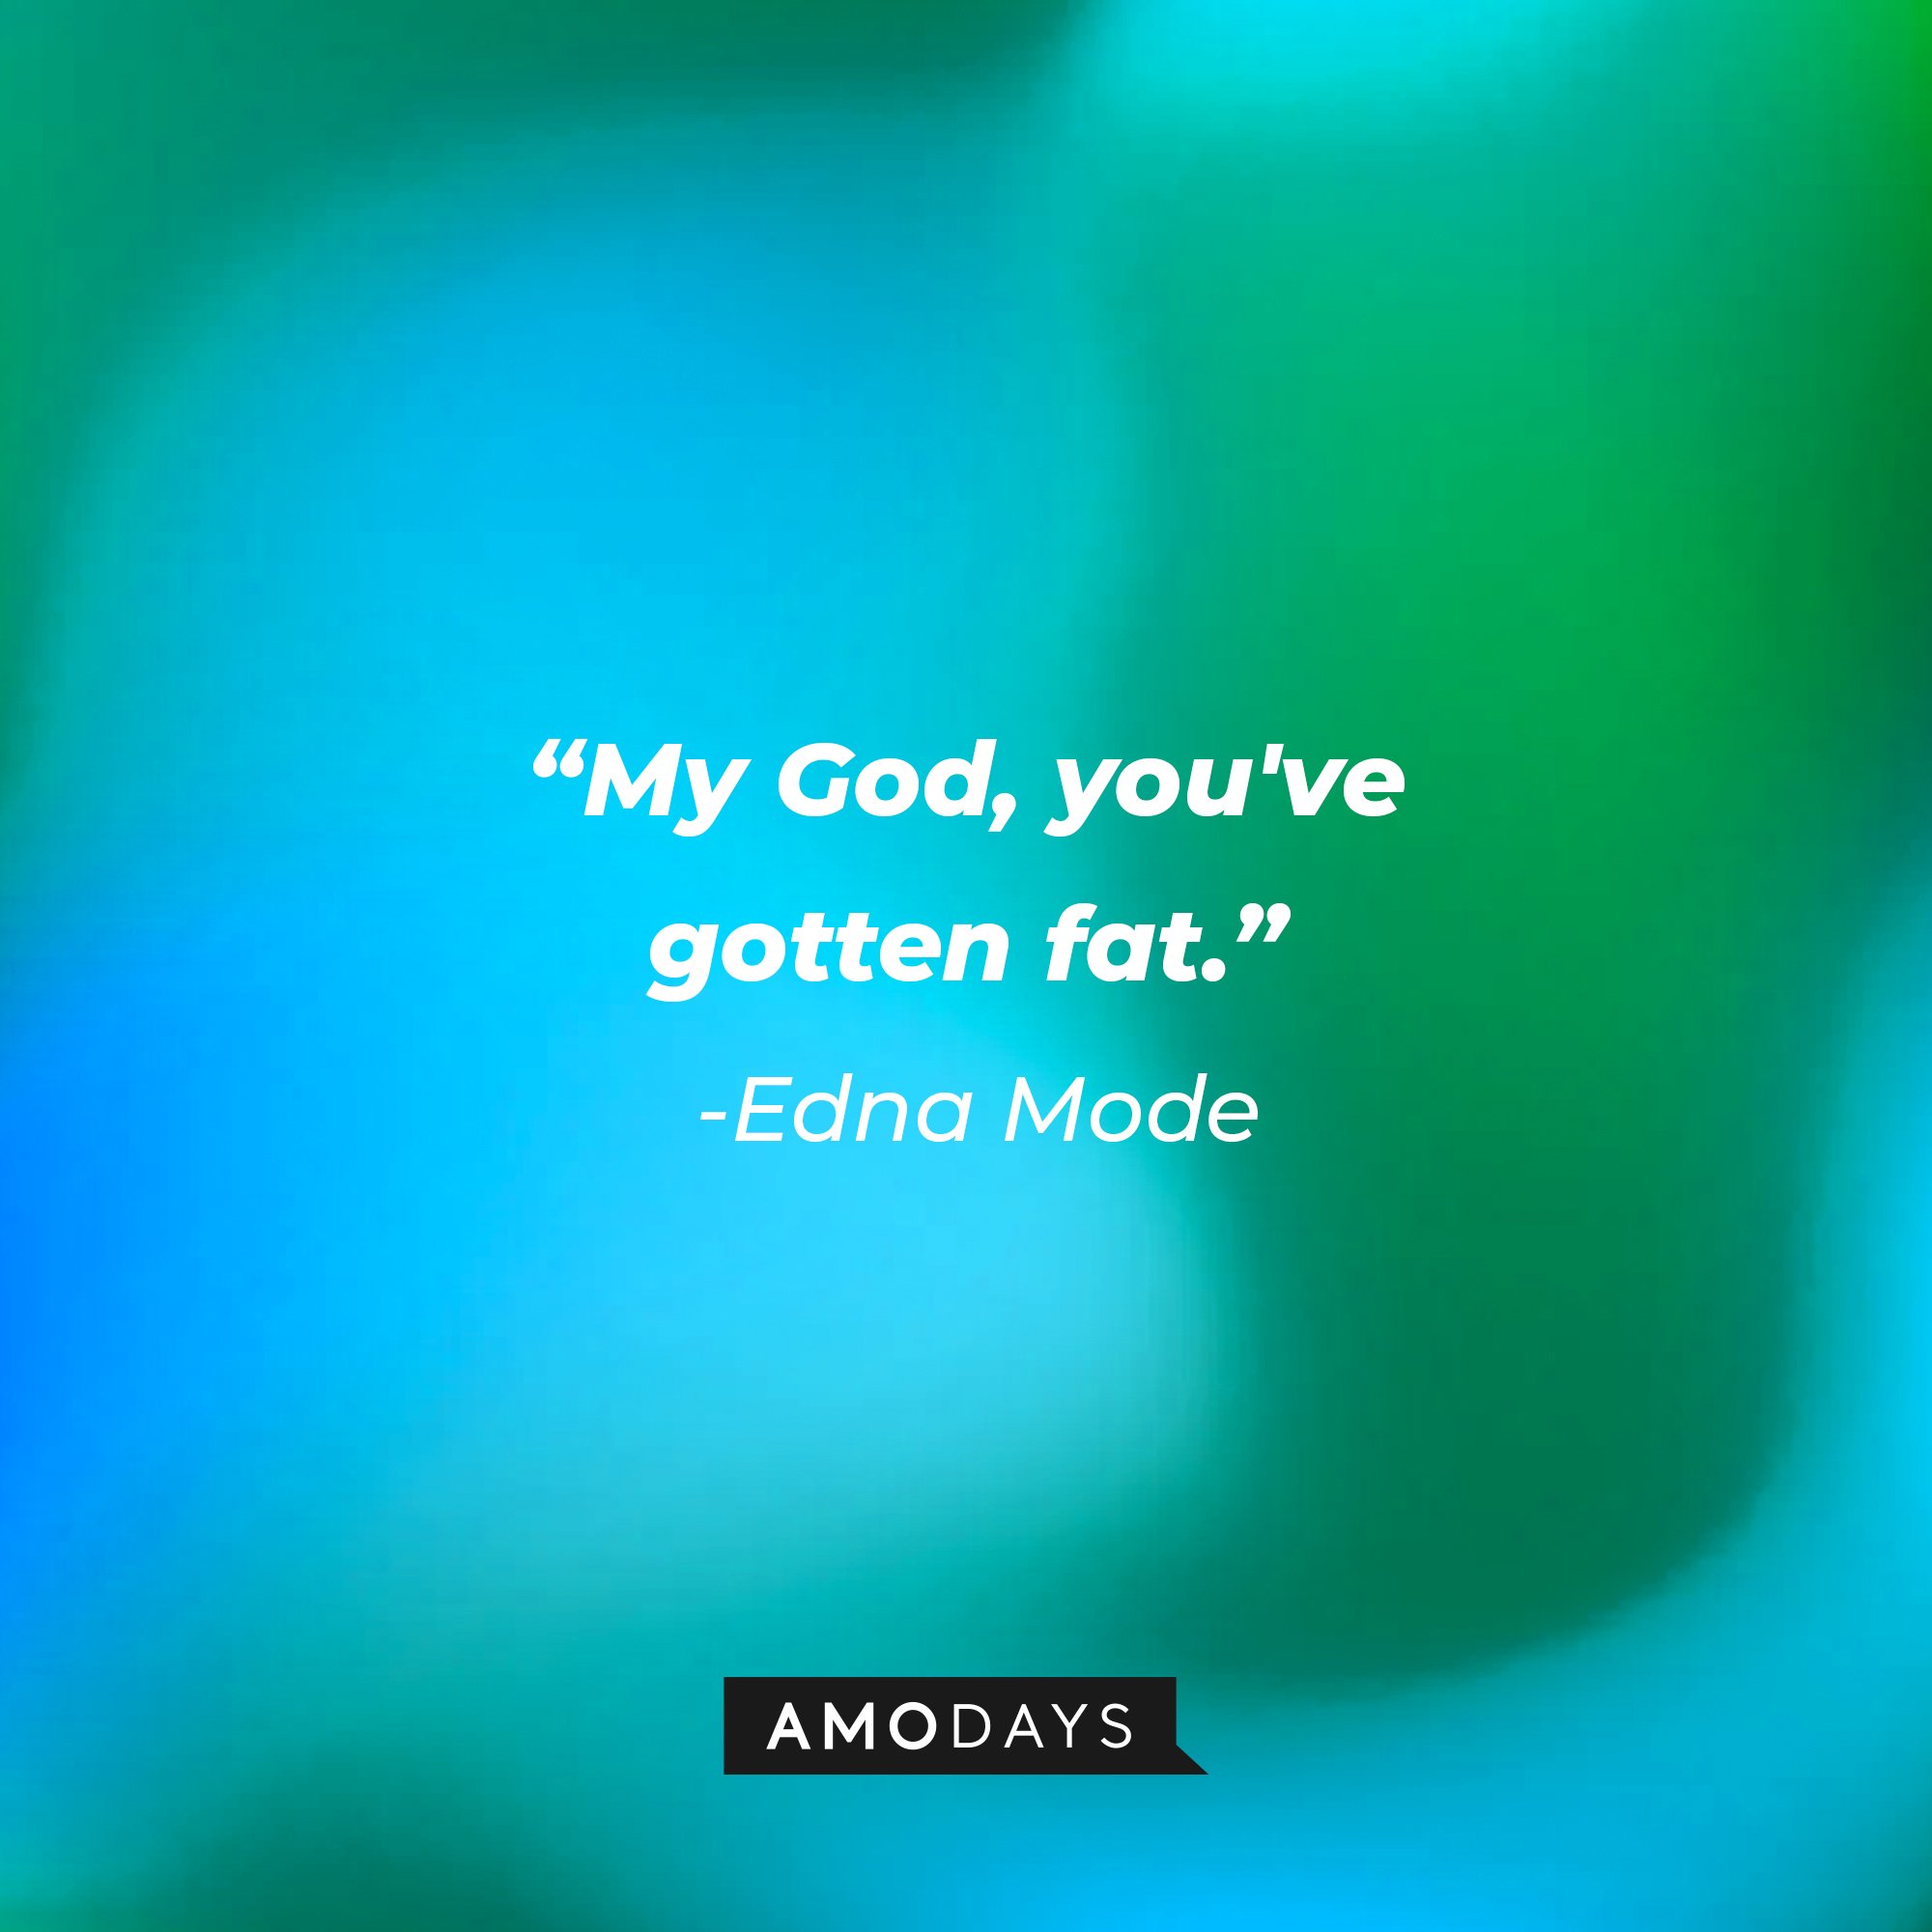 Edna Mode’s quote: "My God, you've gotten fat." | Image: AmoDays